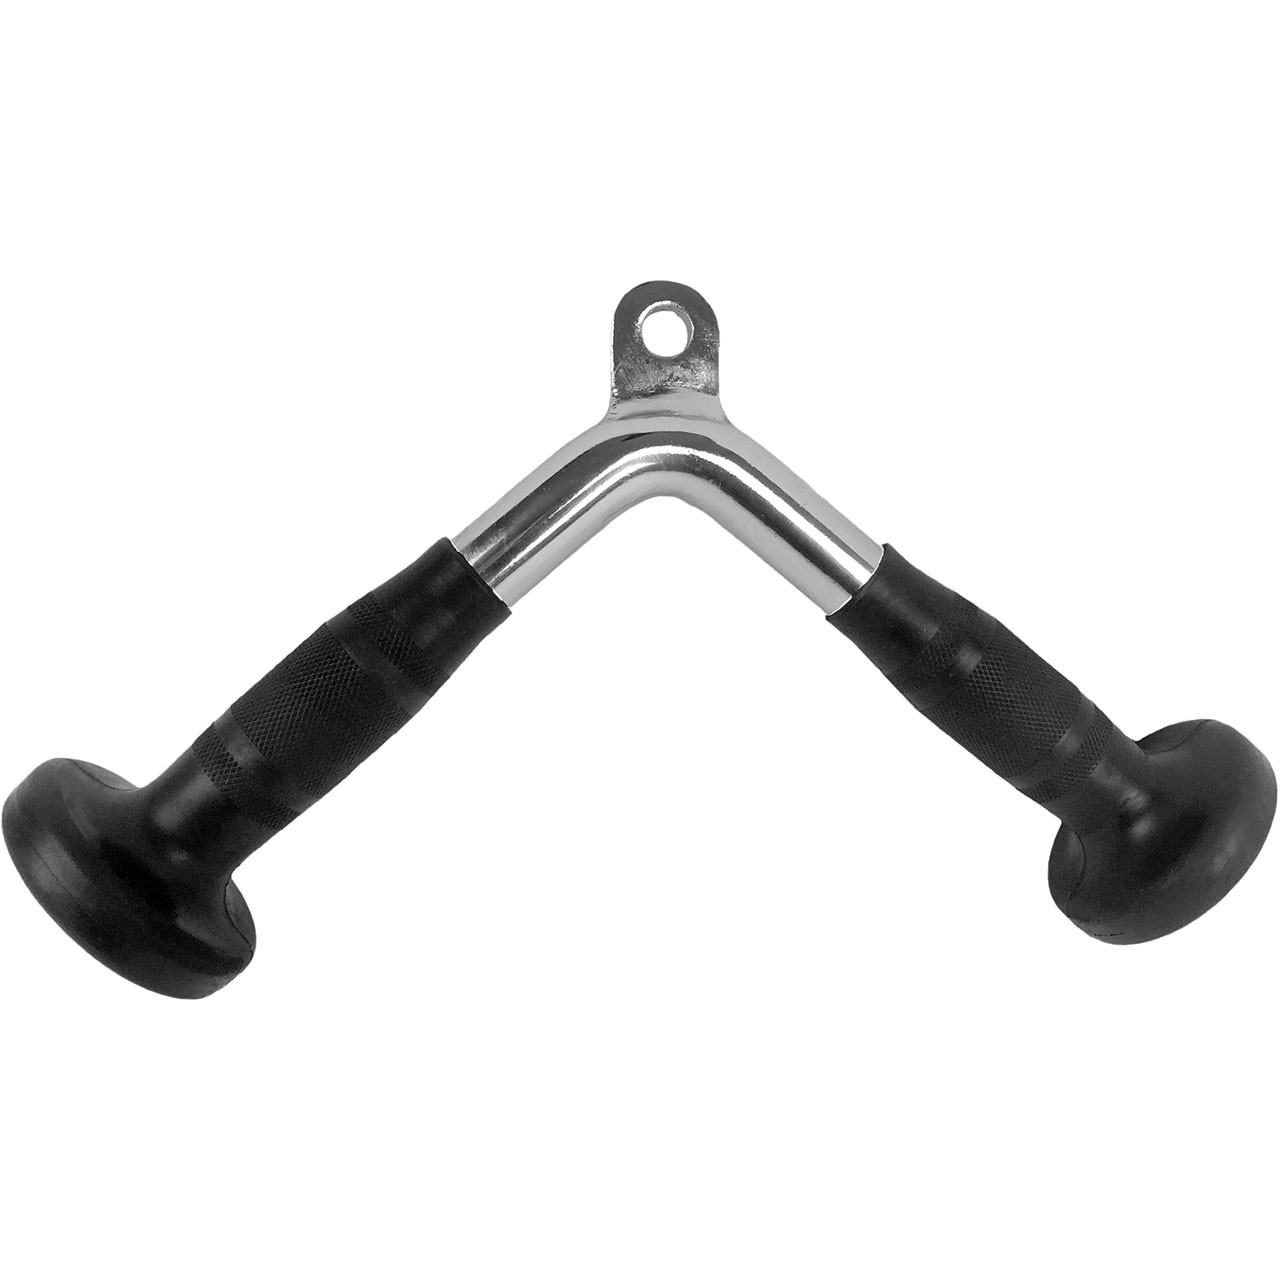 Rubber Coated Triceps Bar for Cable Pulley Machines